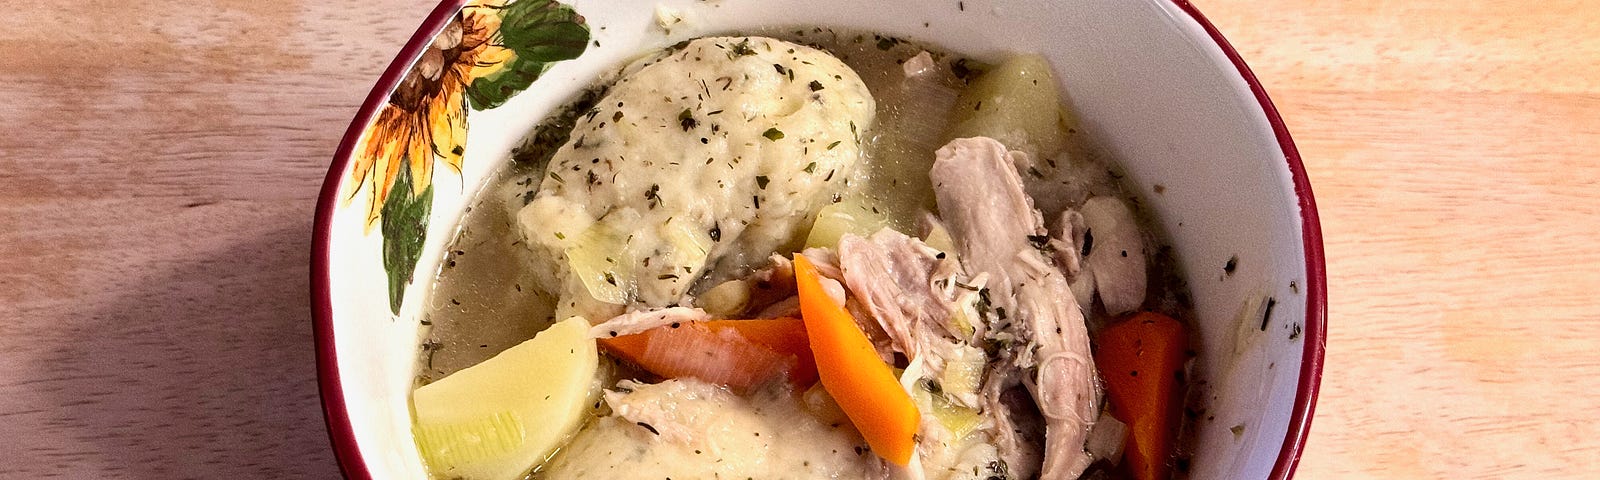 An image of chicken fricot, a sort of chicken stew.